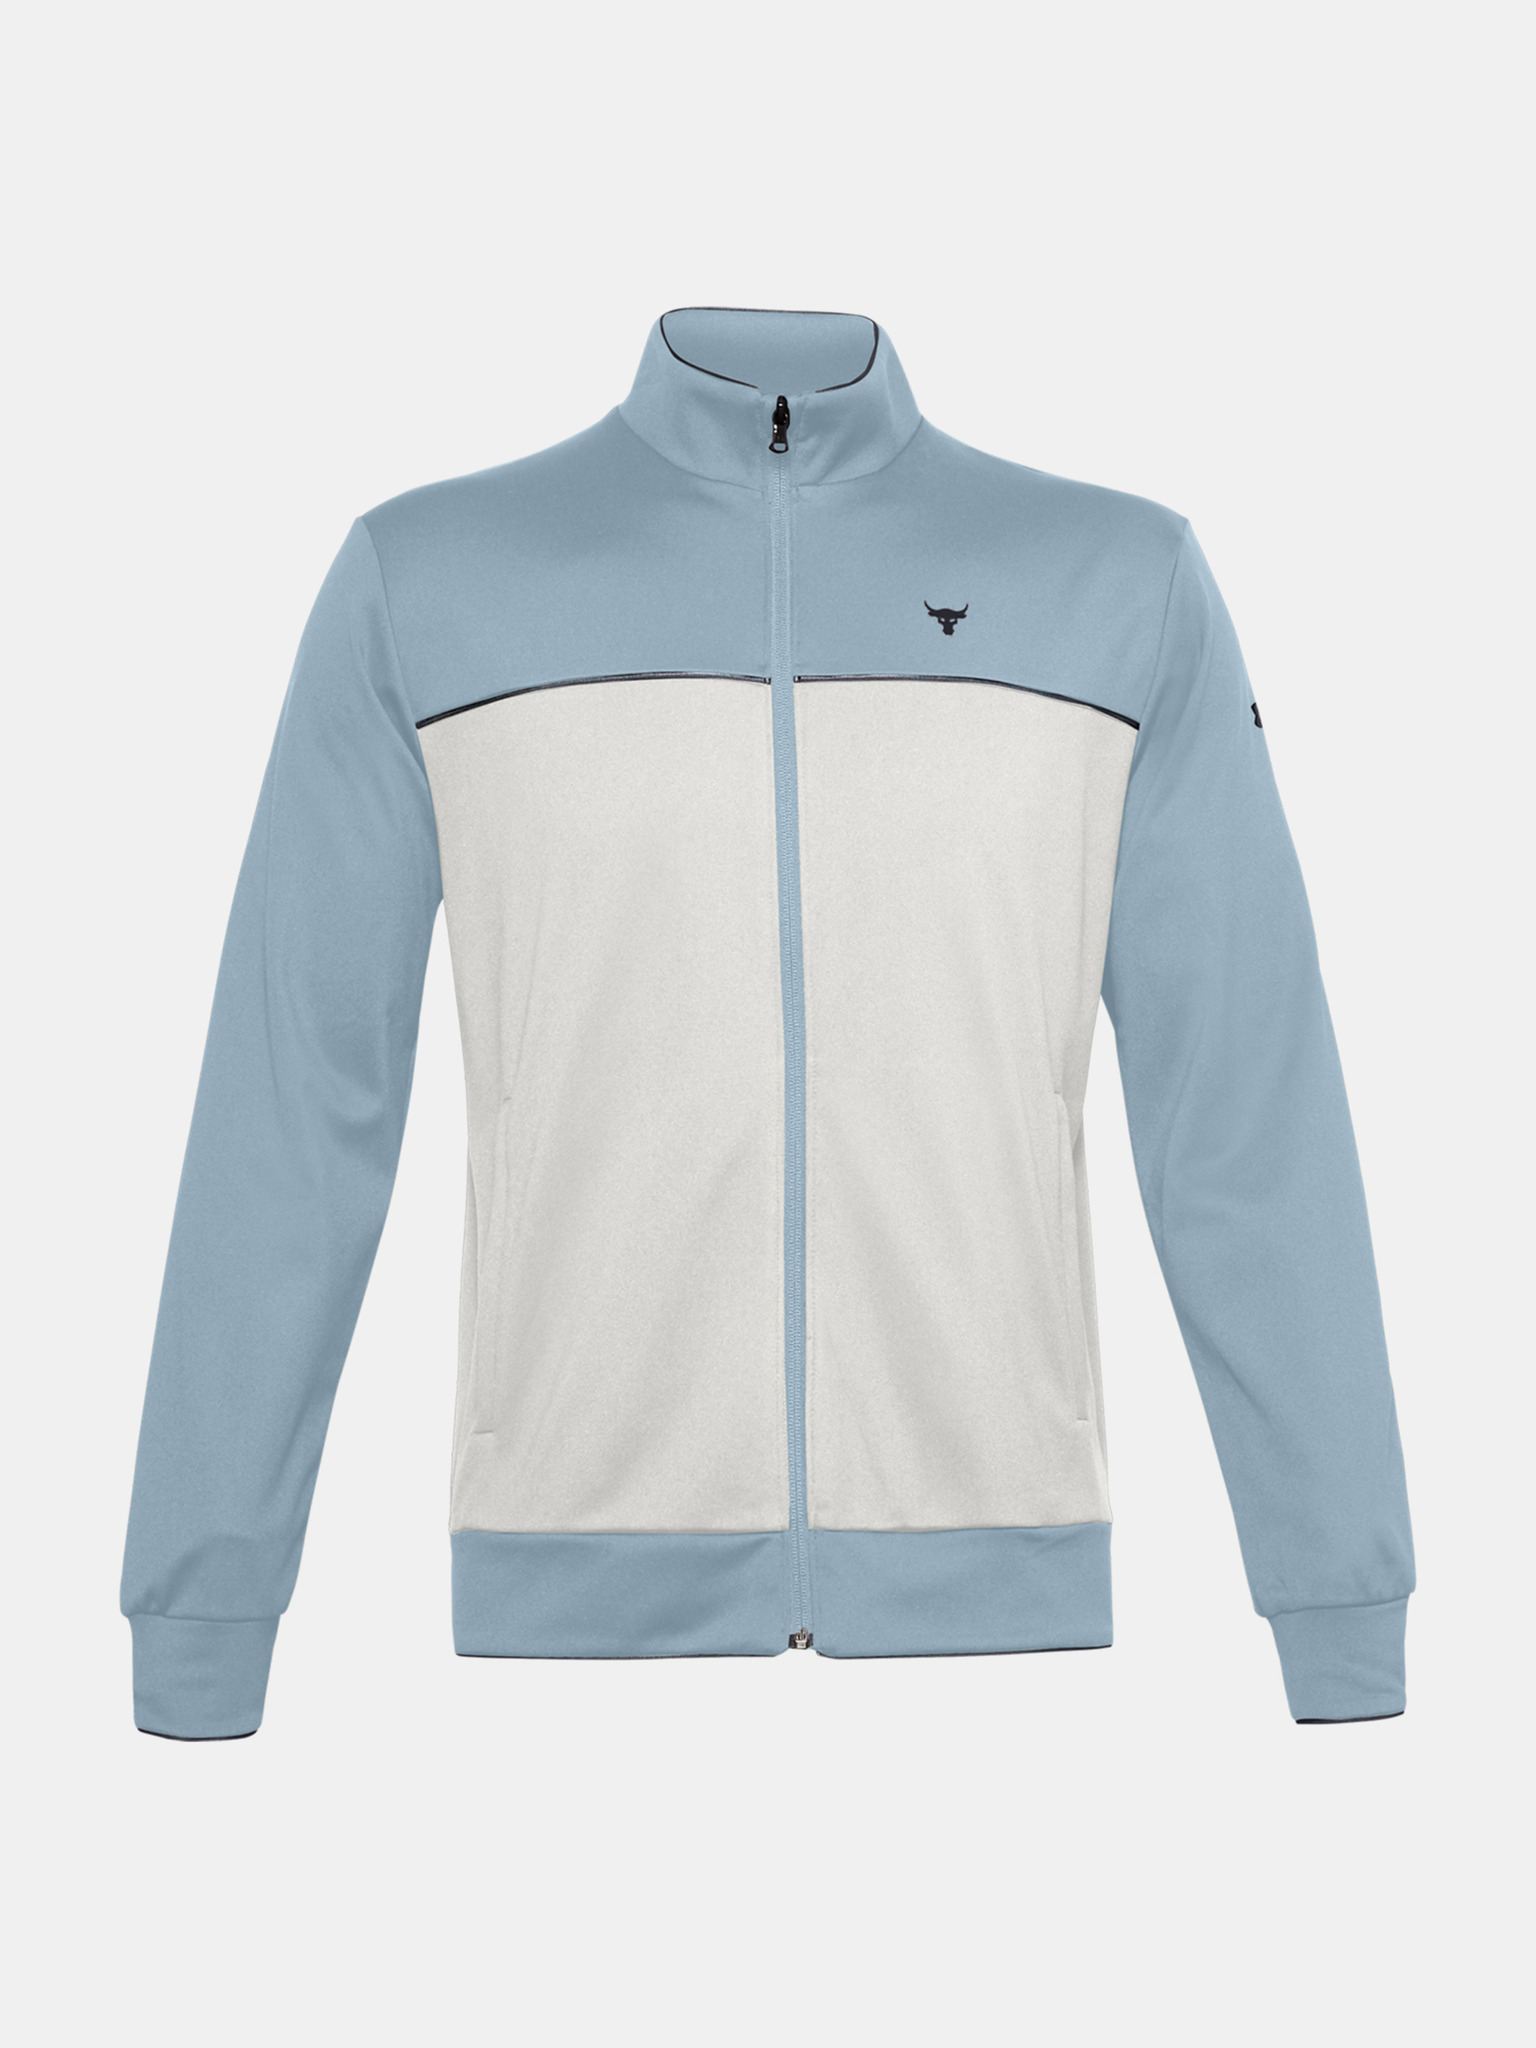 Under Armour Men's Project Rock Knit Track Jacket 